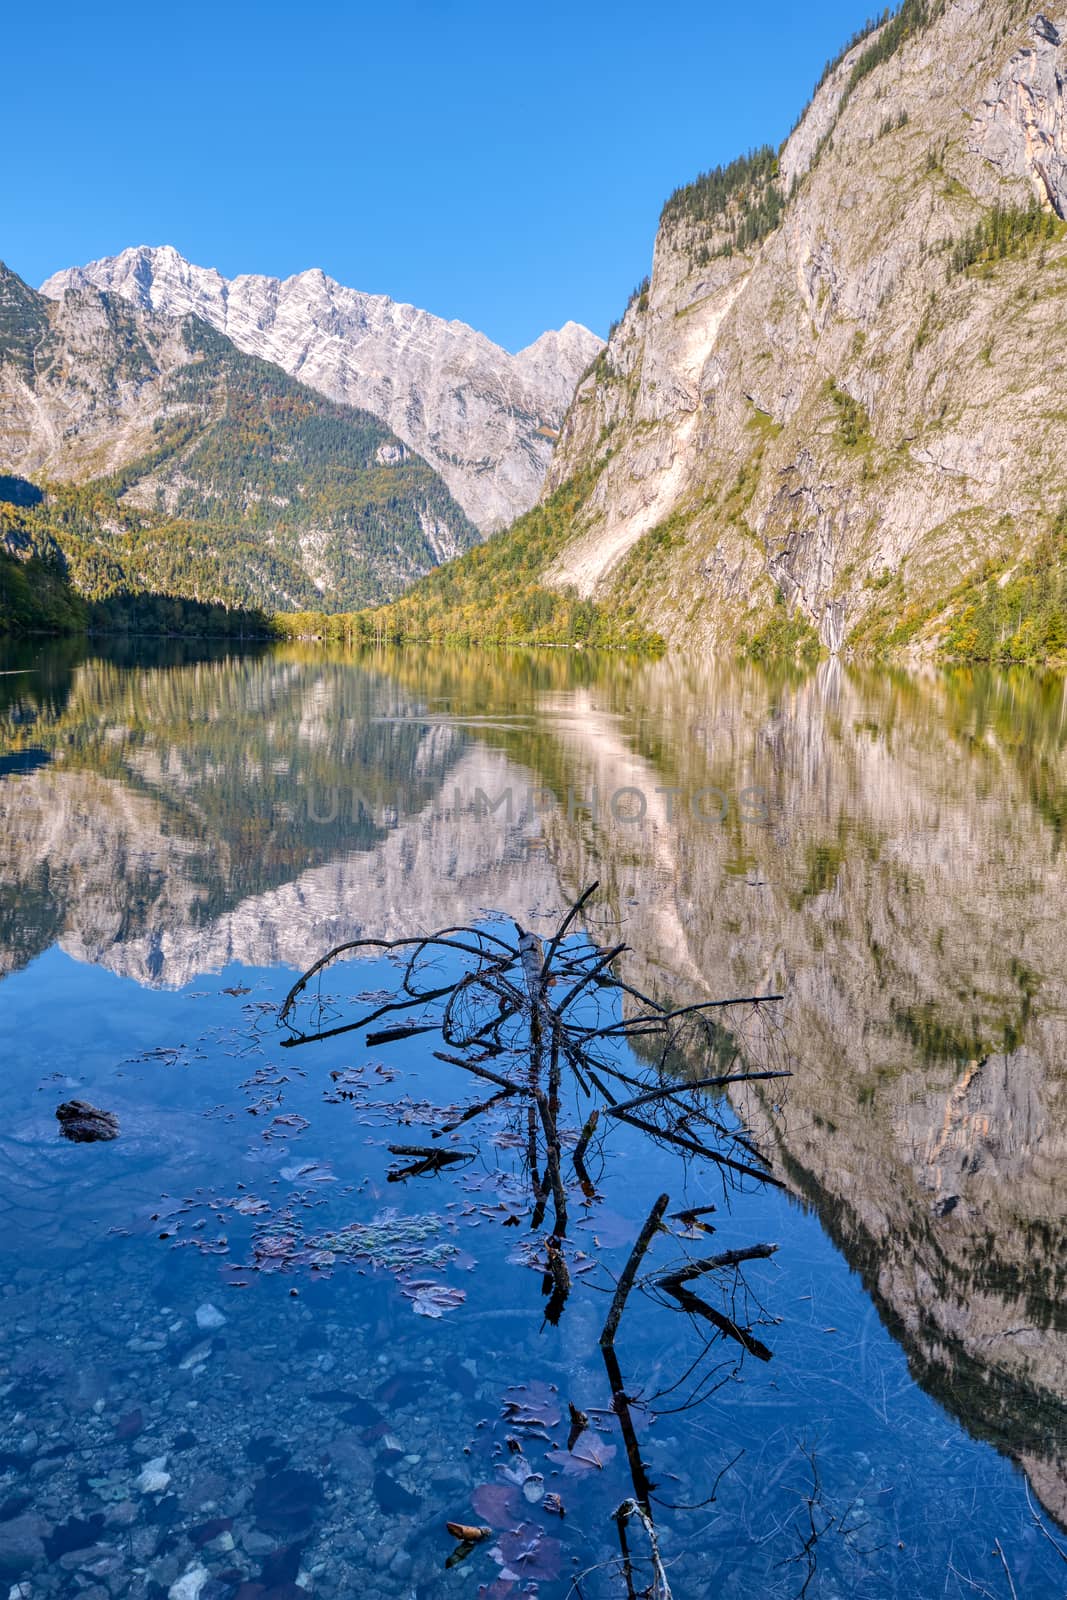 The beautiful Obersee in the Bavarian Alps with a reflection of the mountains in the water